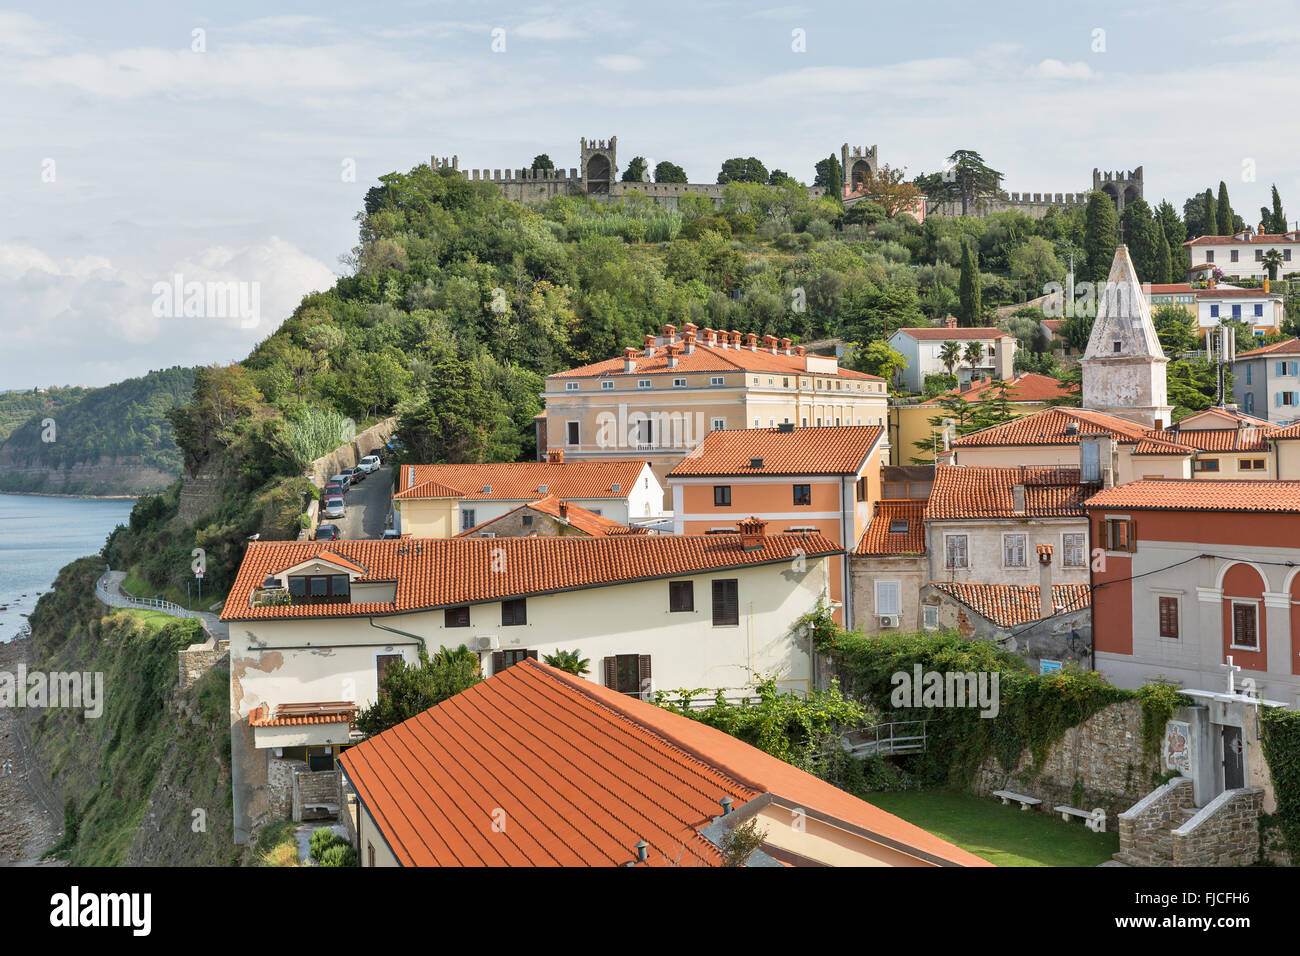 Piran Old Town cityscape with narrow streets and red roof tiles, Slovenia. Stock Photo